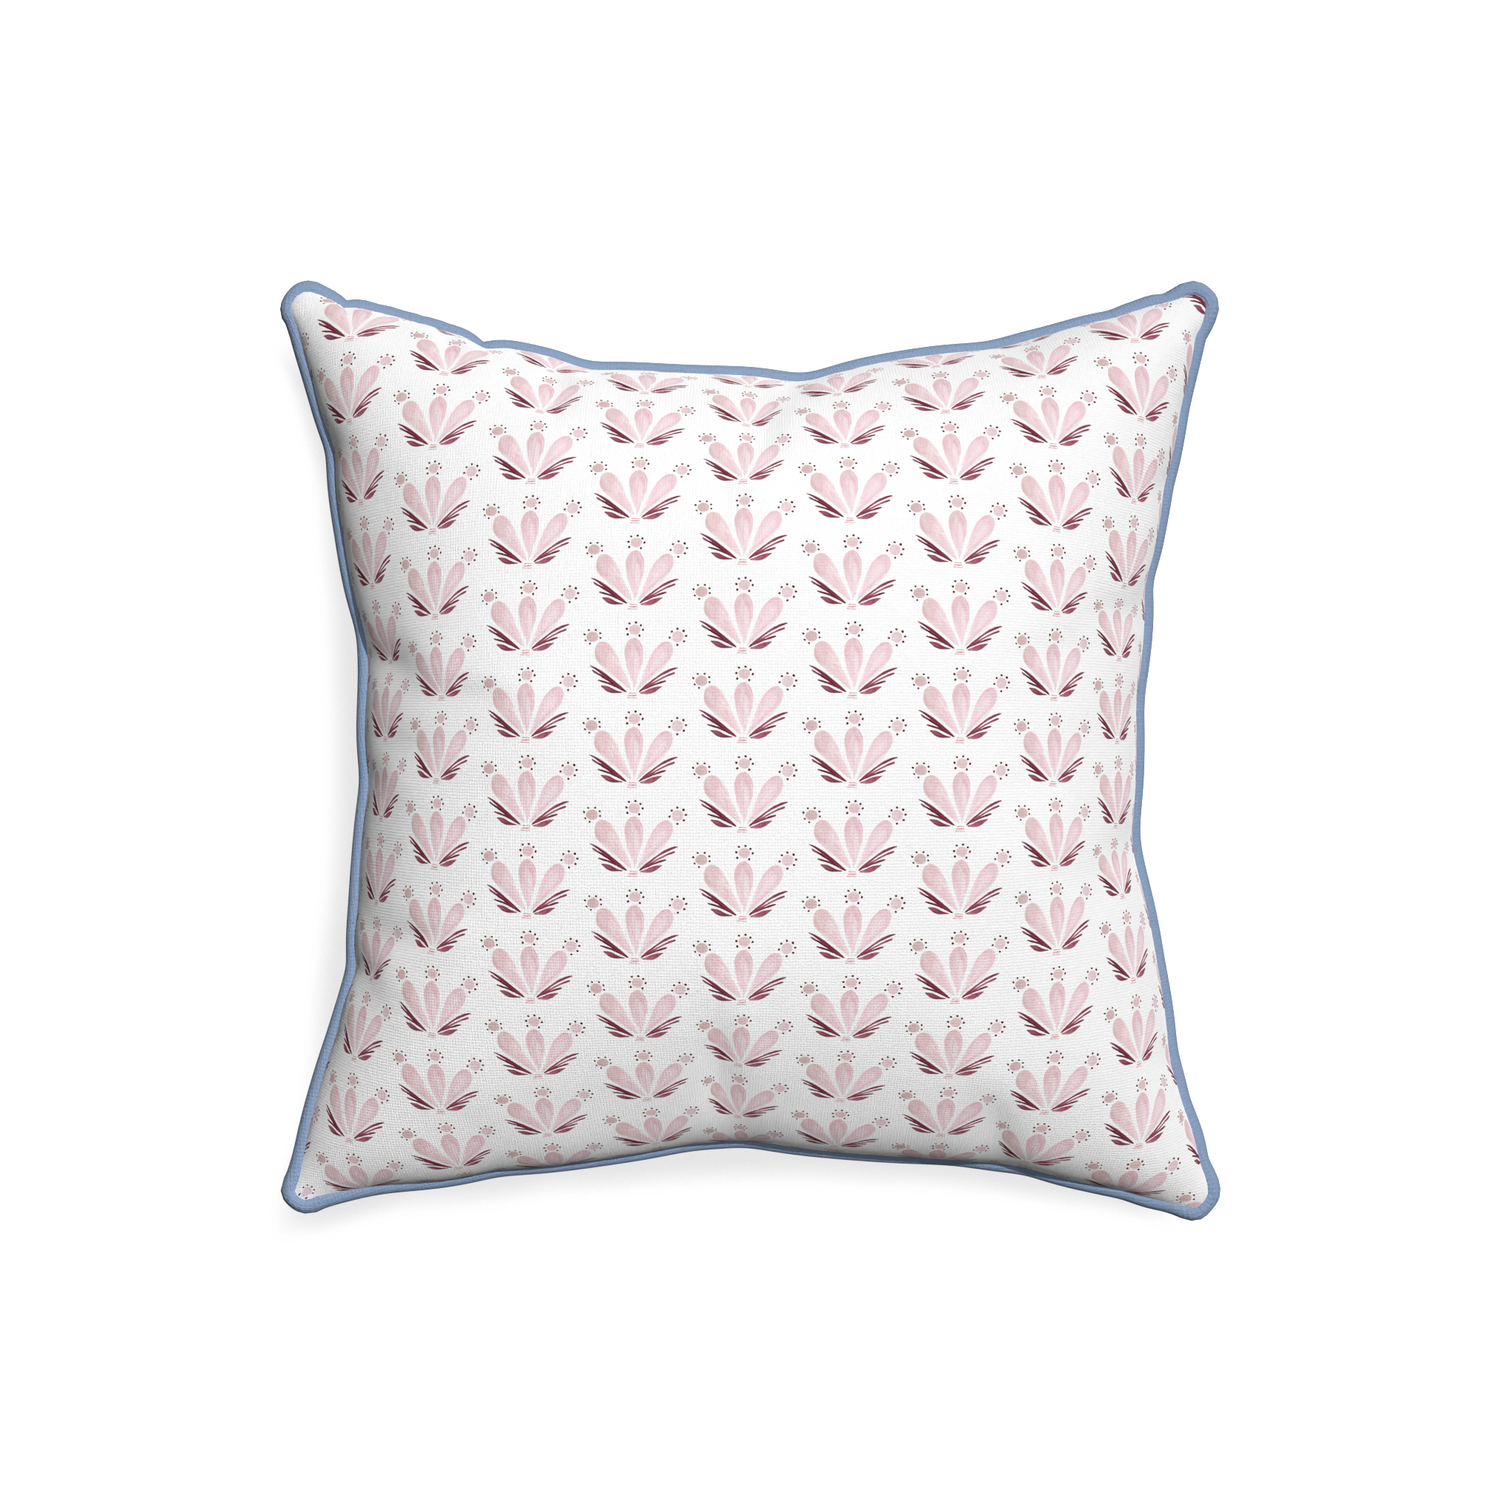 20-square serena pink custom pink & burgundy drop repeat floralpillow with sky piping on white background